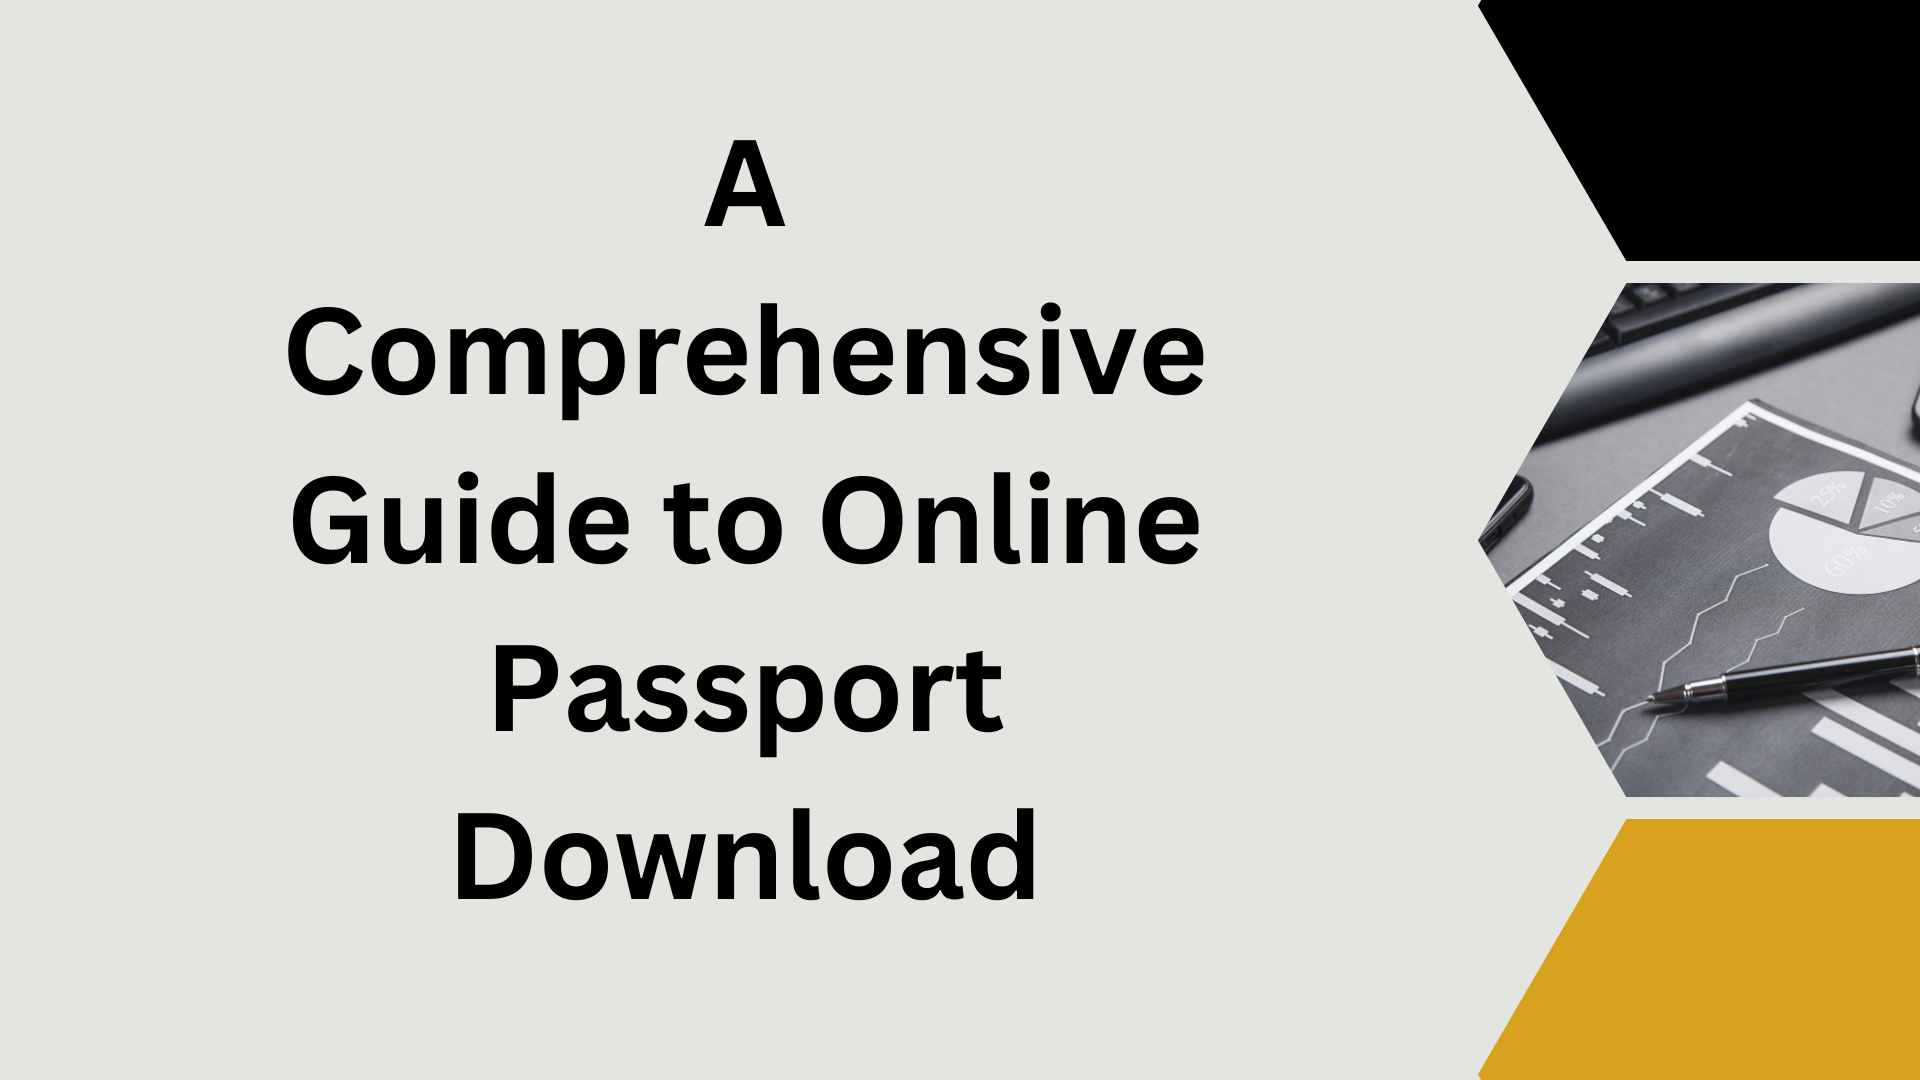 A Comprehensive Guide to Online Passport Download